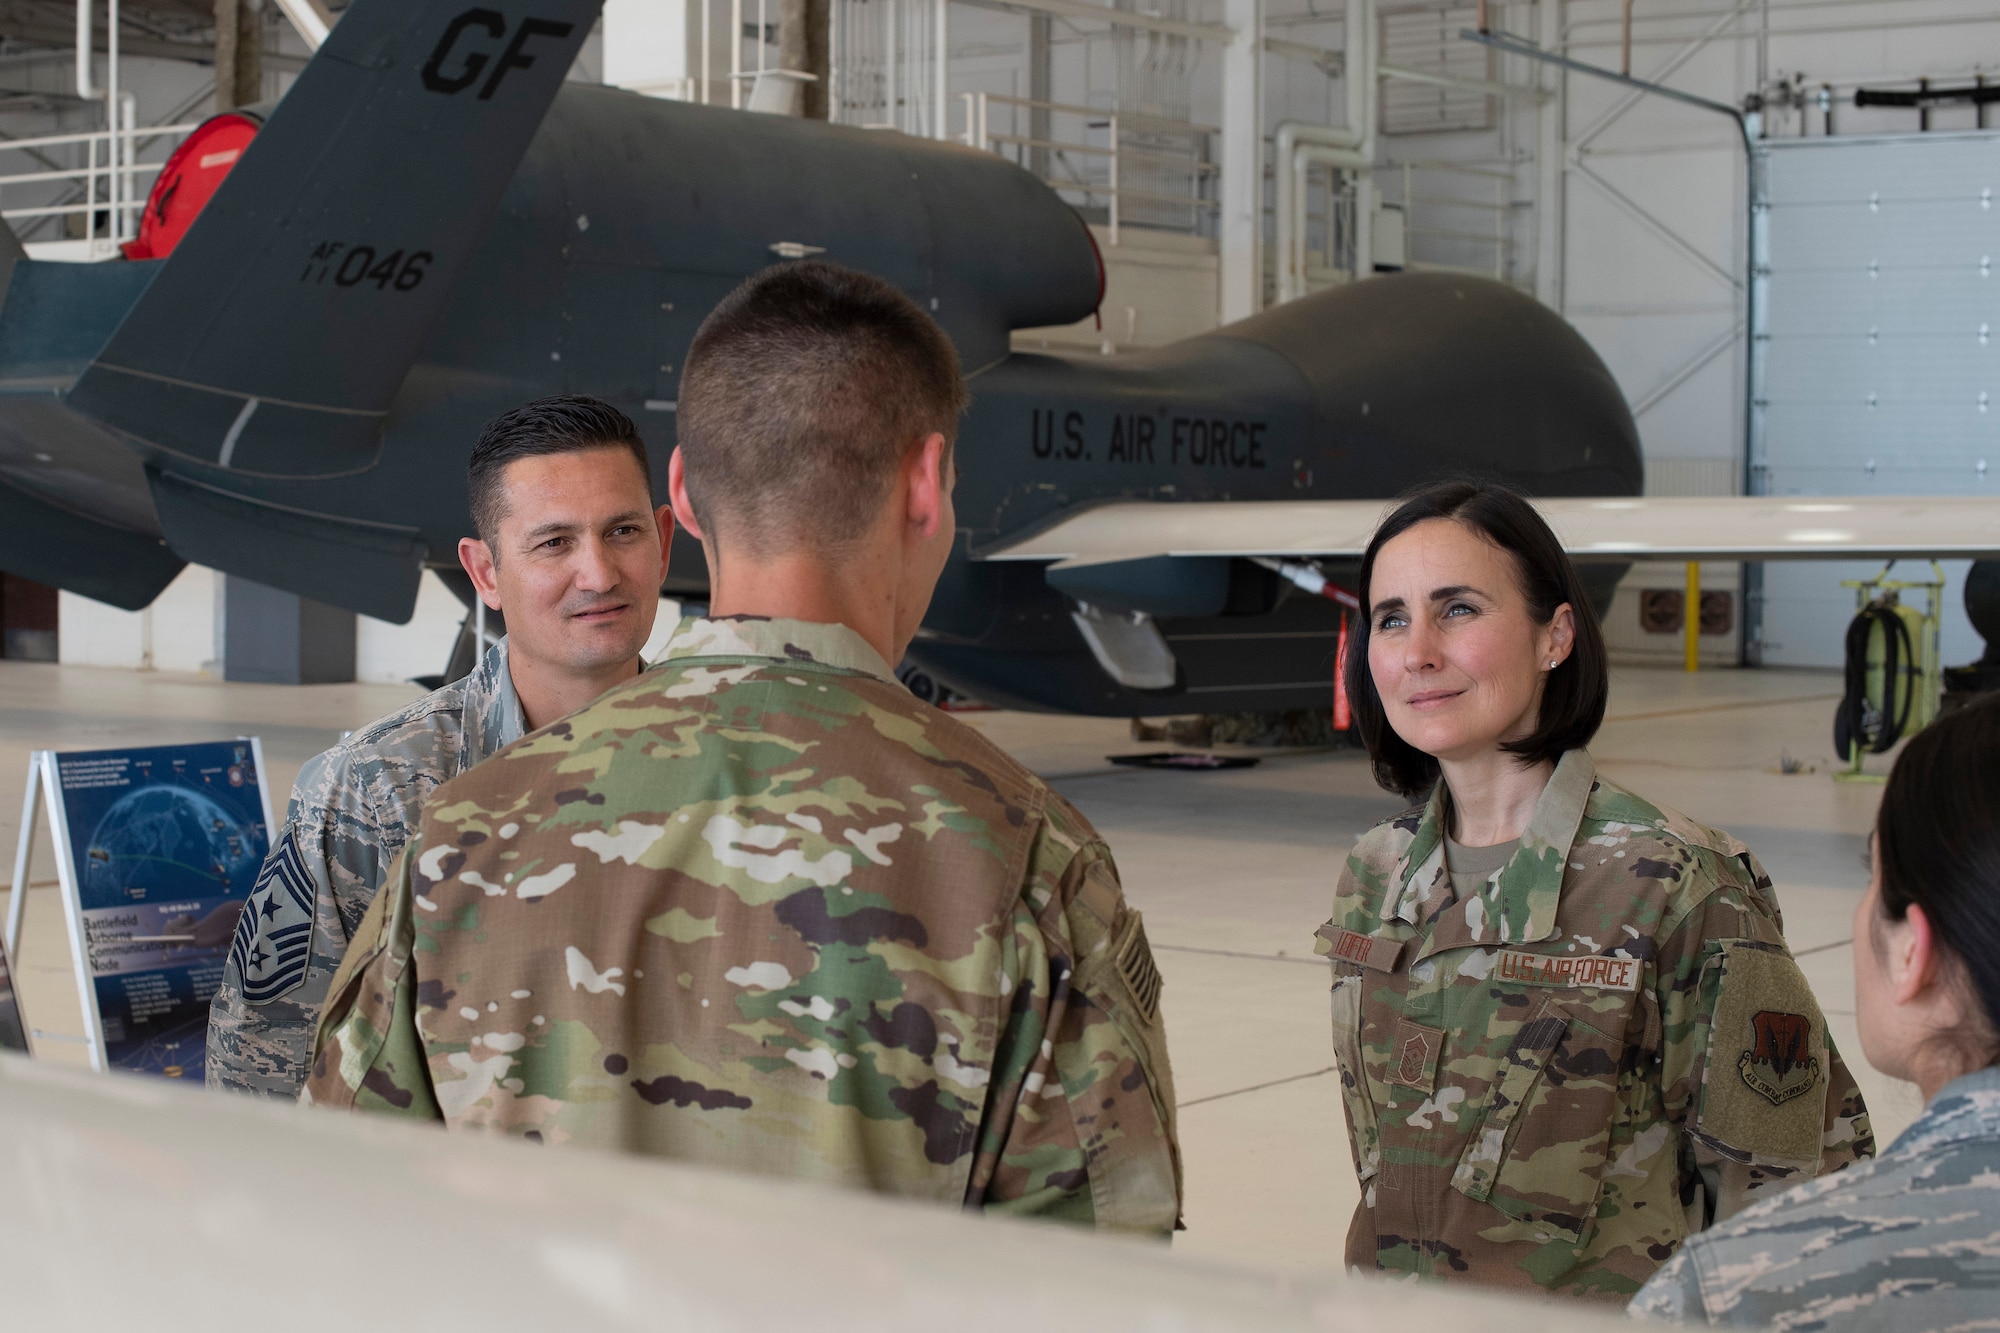 Chief Master Sgt. Summer Leifer, 25th Air Force command chief, right, receives a brief from Senior Airman Cyrus Argo, 69th Maintenance Squadron crew chief, about his role in RQ-4 Global Hawk operations June 5, 2019, on Grand Forks Air Force Base, North Dakota. Cyrus briefed alongside a sensor operator, pilot and avionics specialist to provide Leifer a complete breakdown of Grand Forks AFB’s part in the intelligence, surveillance and reconnaissance mission. (U.S. Air Force photo by Senior Airman Elora J. Martinez)